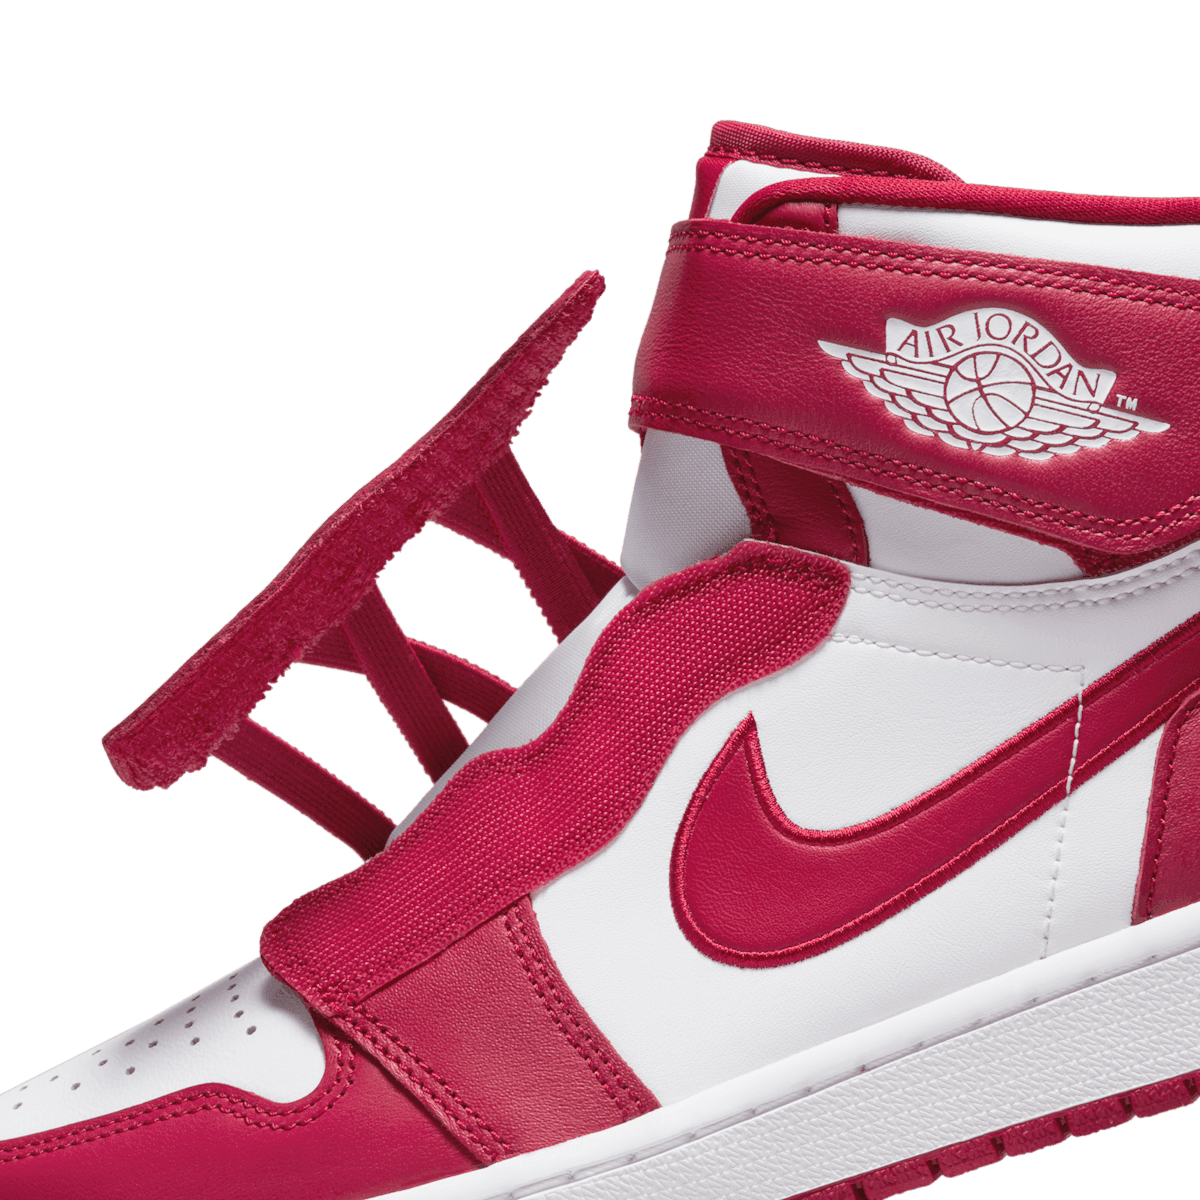 Jordan 1 Flyease Red and White Angle 6